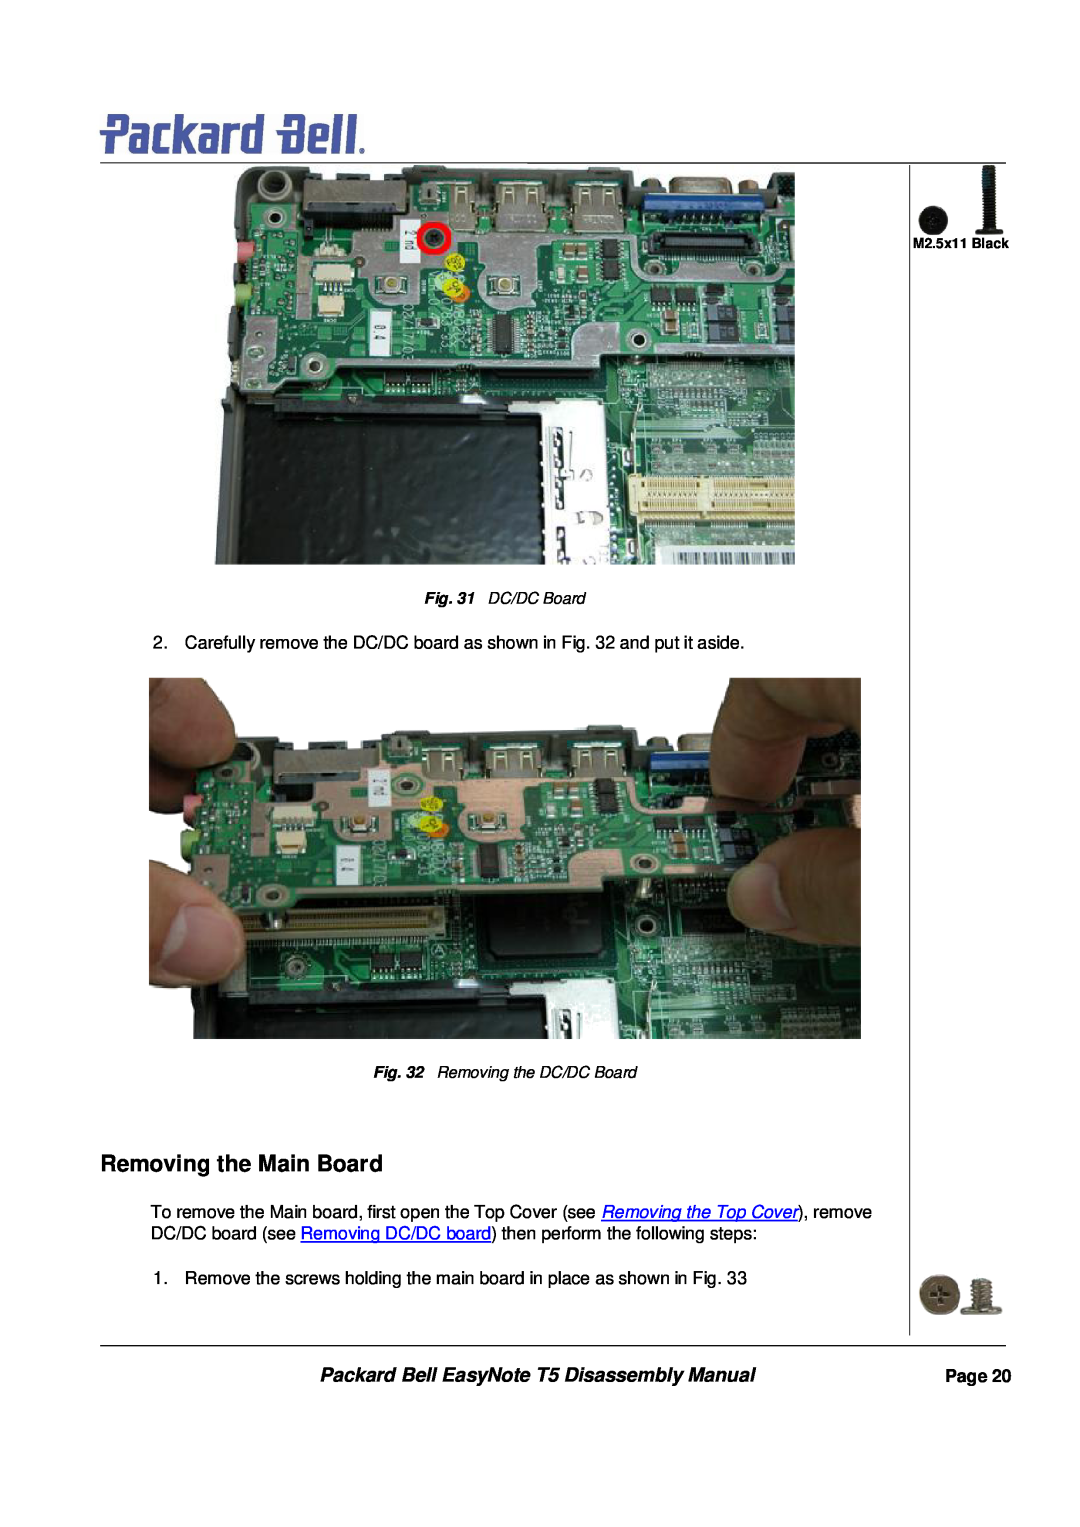 Packard Bell manual Removing the Main Board, Packard Bell EasyNote T5 Disassembly Manual 